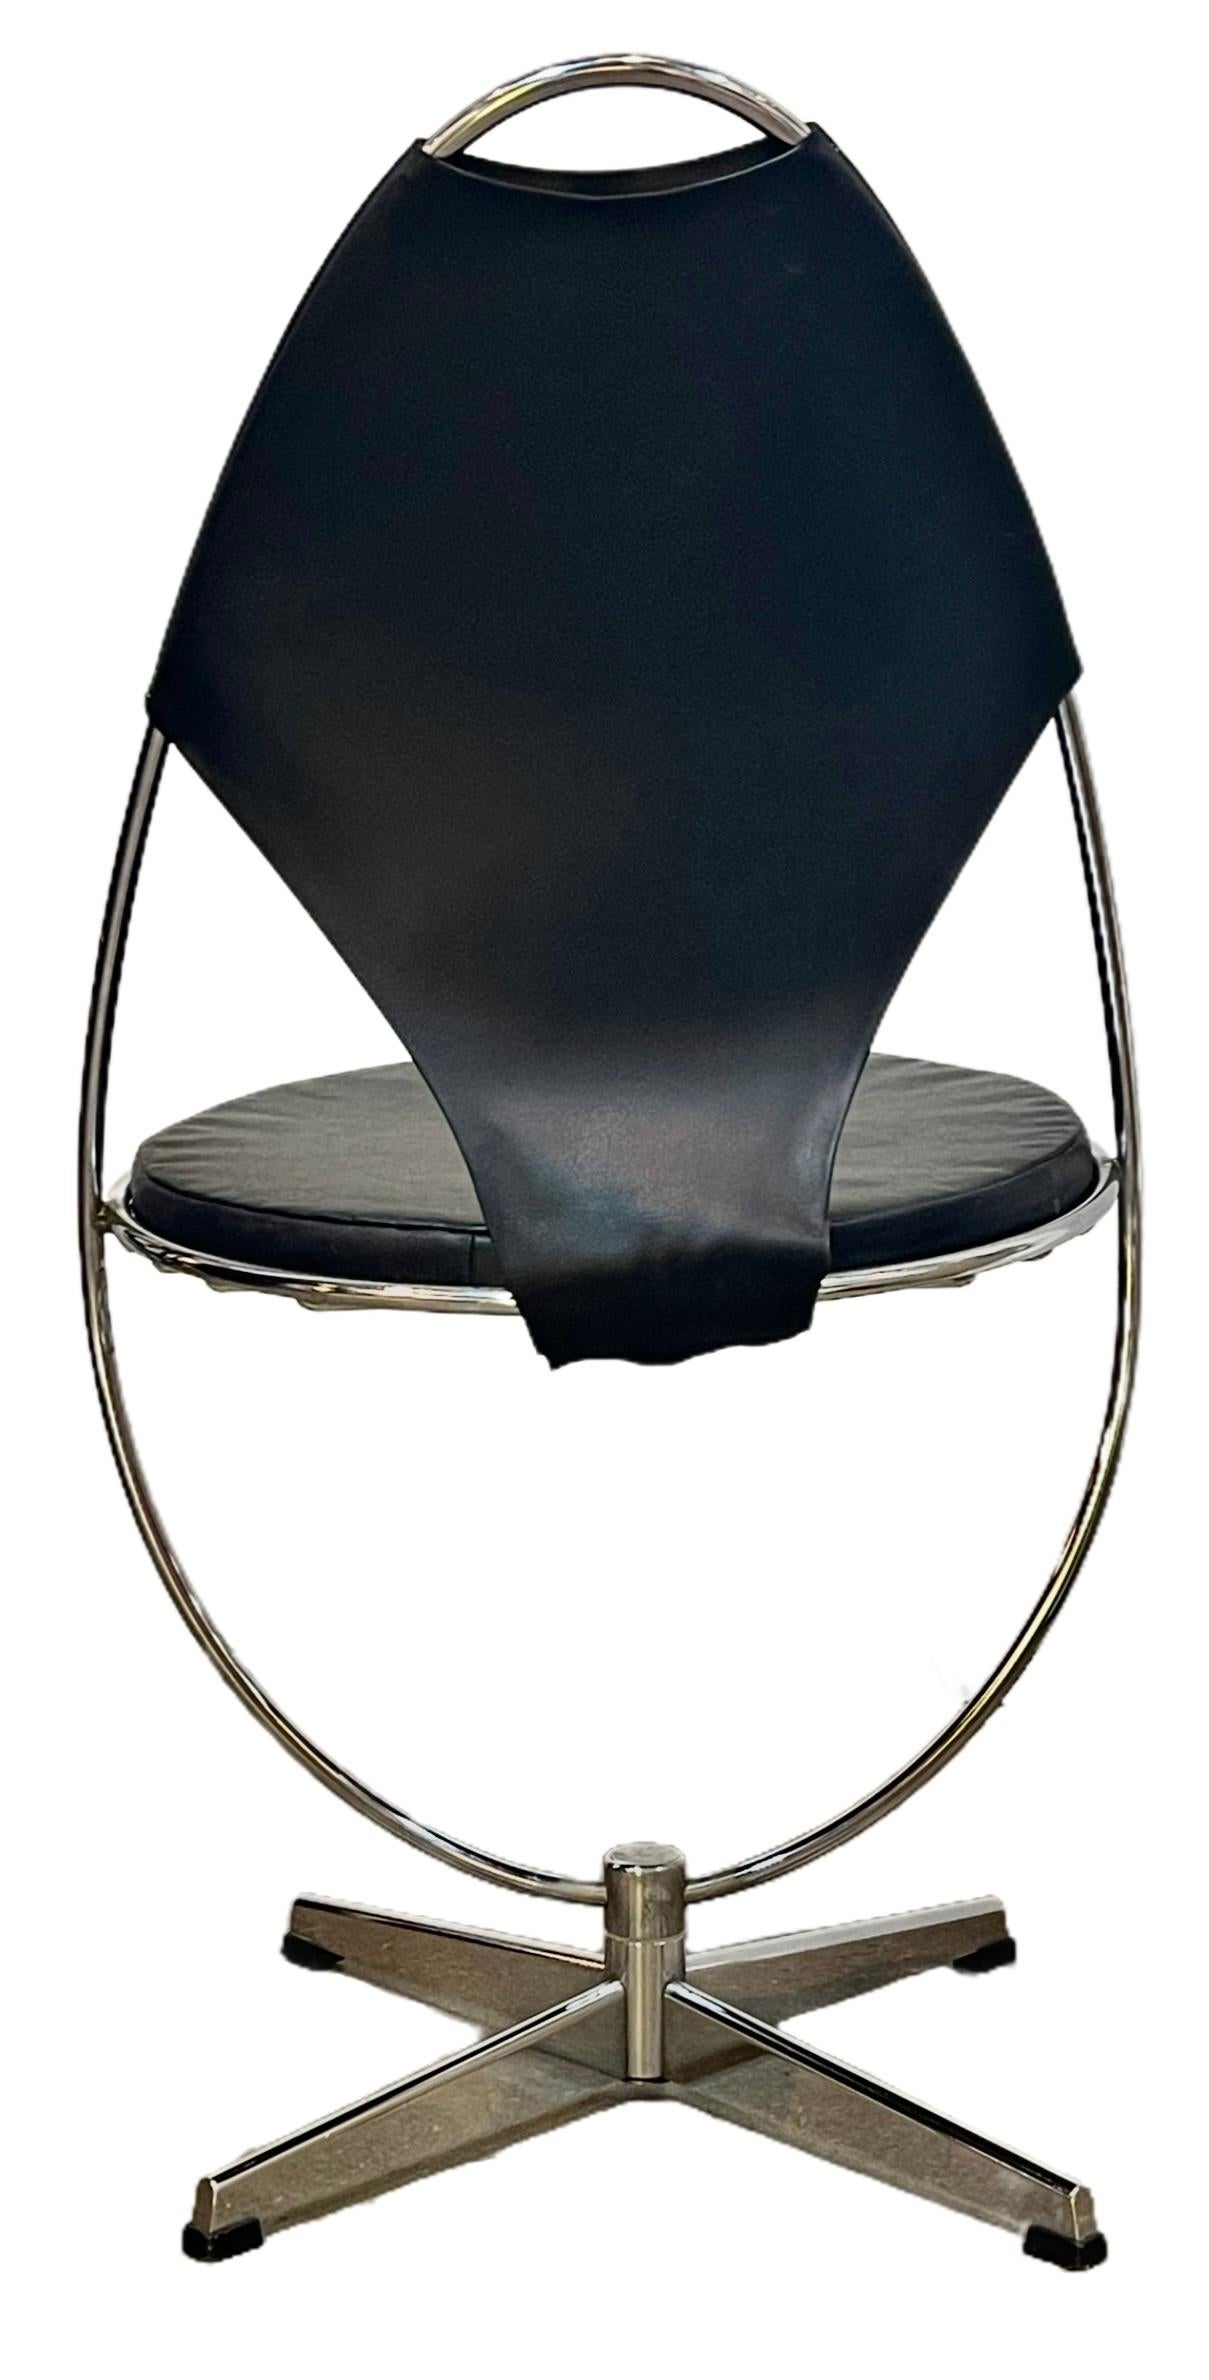 An Atomic Age Swedish chrome swivel chair with curved base and seat back and detachable round vinyl cushion seat.

Sits on a four legged metal base, Designed by Dahlens Dalum in Sweden in the 1950s, this chair shows the range of creativity in